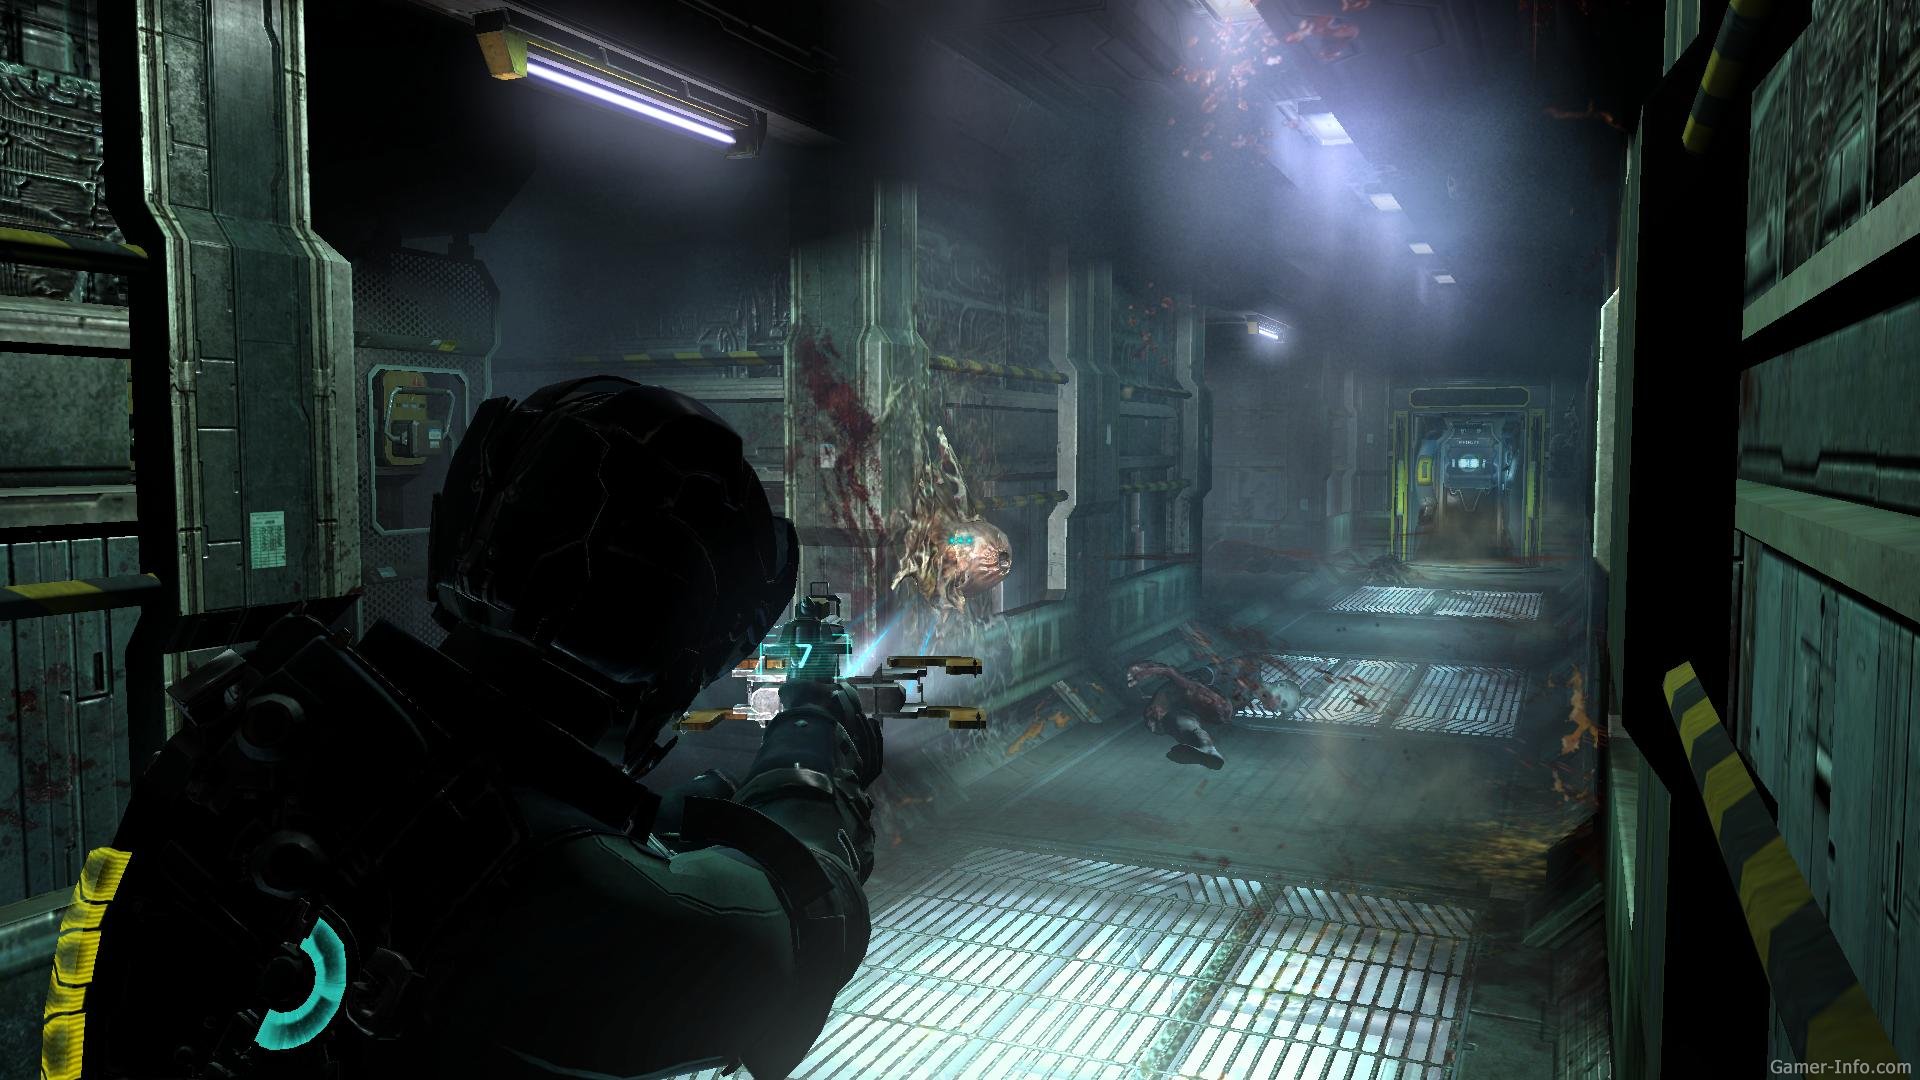 Игра dead space отзывы. Dead Space 2 Limited Edition ps3. Dead Space 2 ps3. Dead Space ПС 3. Dead Space ps2.